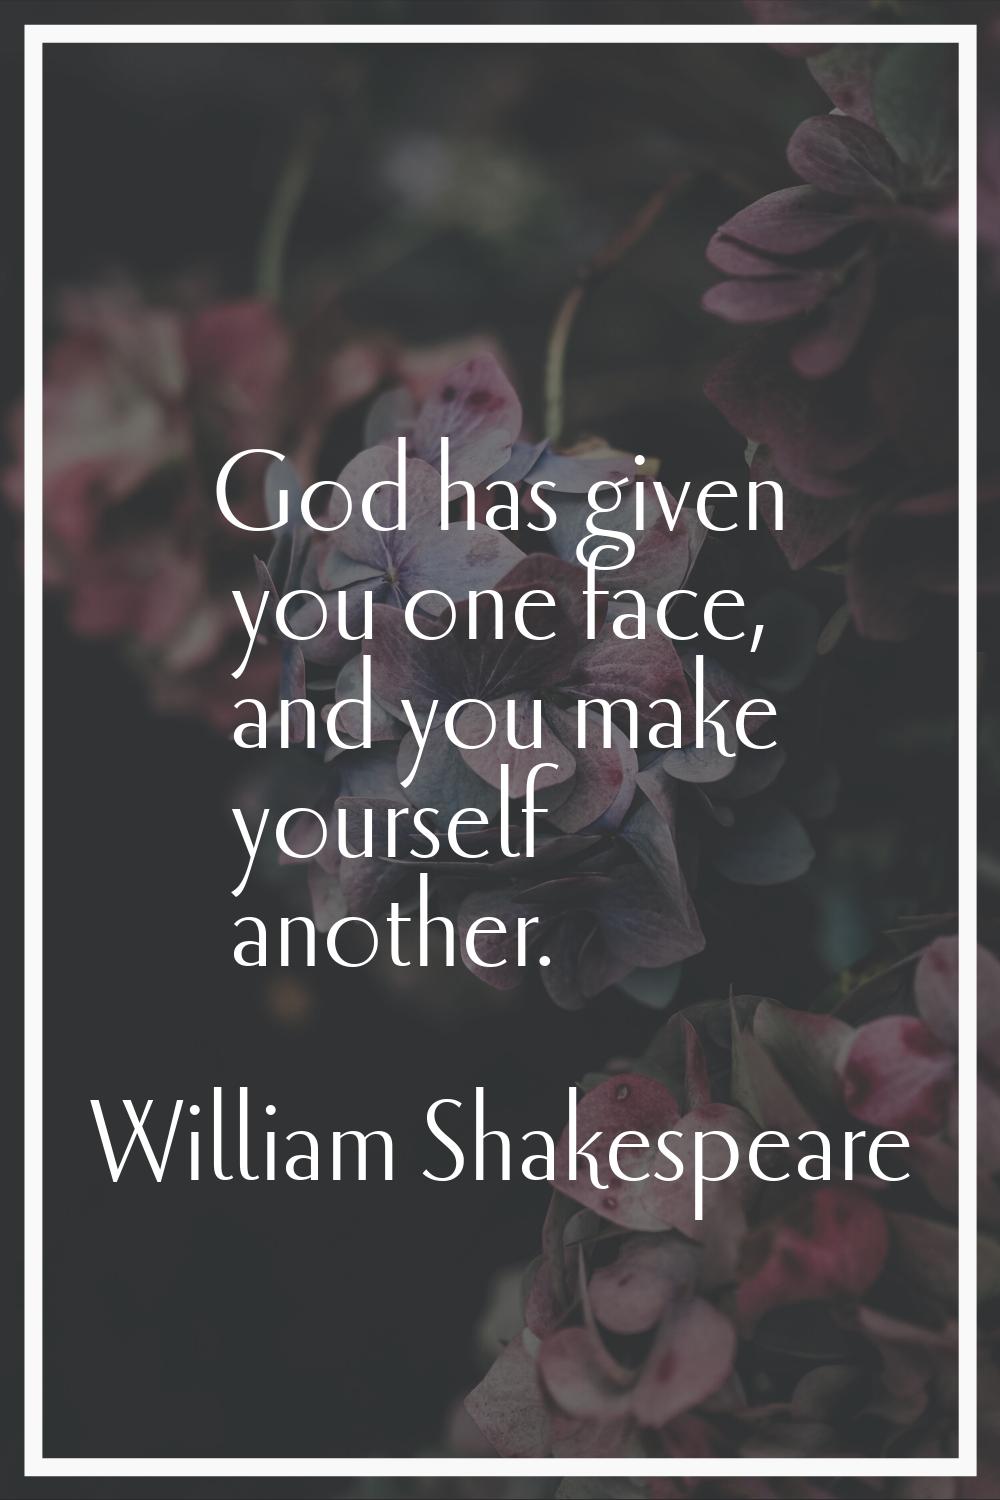 God has given you one face, and you make yourself another.